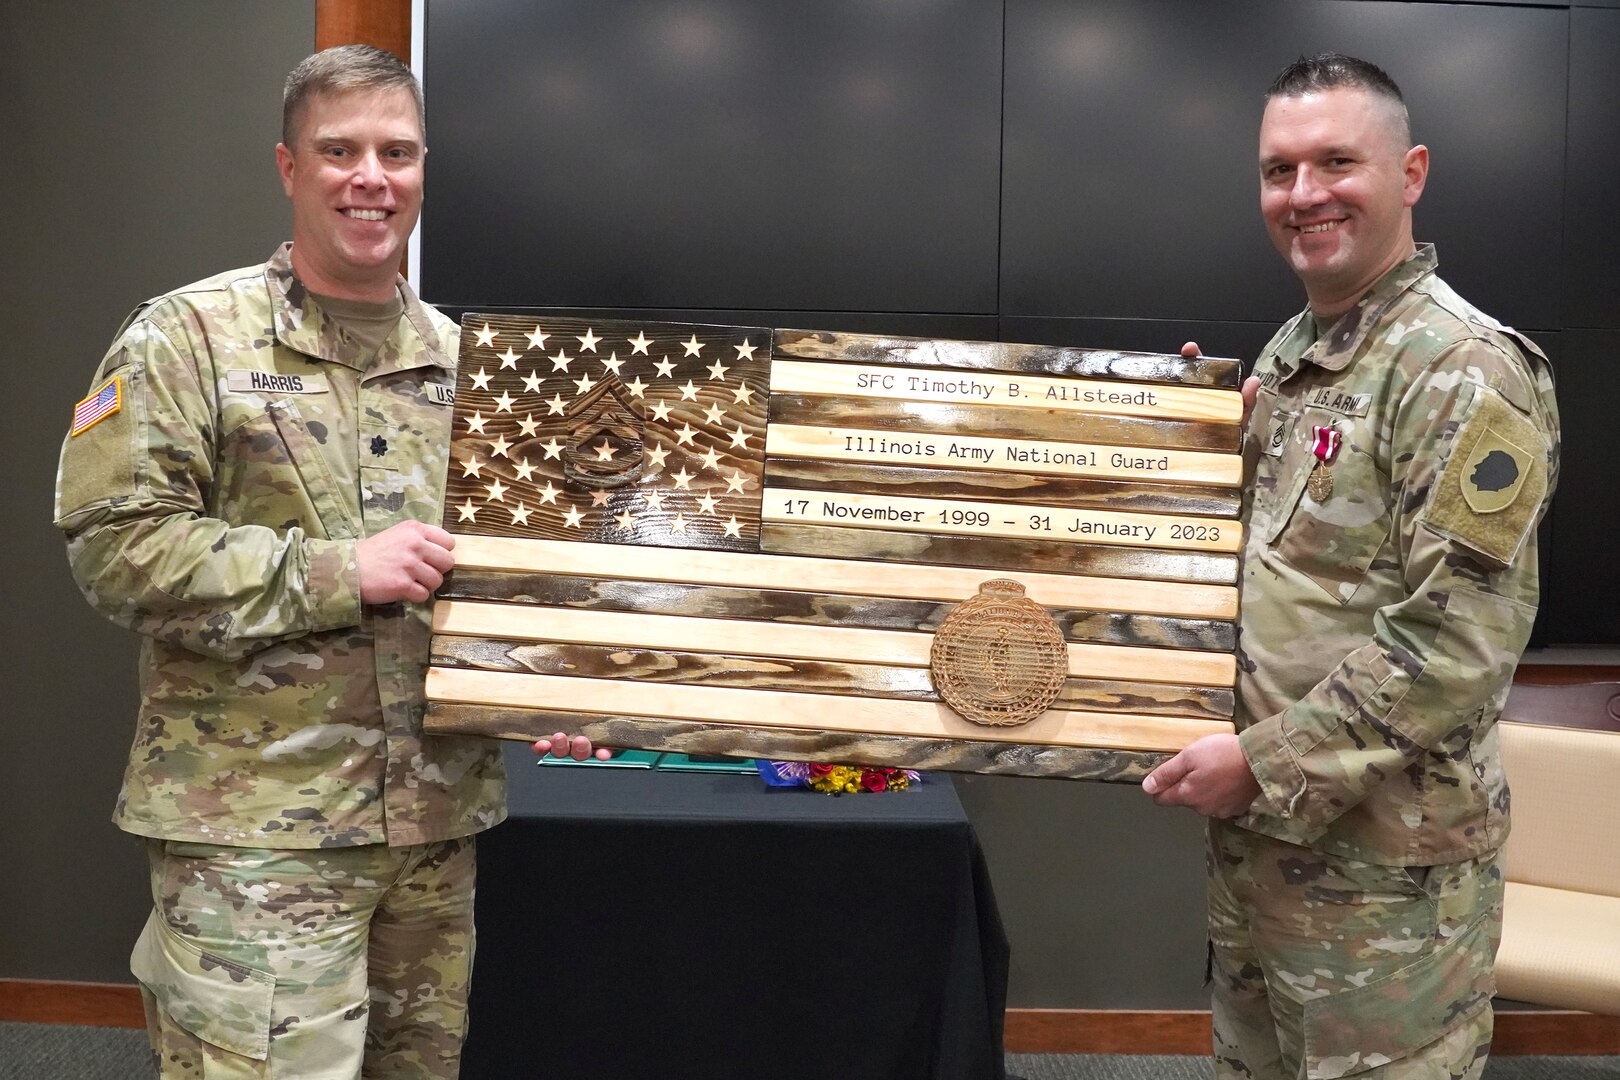 Lt. Col. Joseph Harris, the Recruiting and Retention Battalion commander, presents a wooden flag to Sgt. First Class Timothy Allsteadt, of Bourbonnais, Illinois, during his retirement ceremony at Camp Lincoln in Springfield, Illinois, October 13.